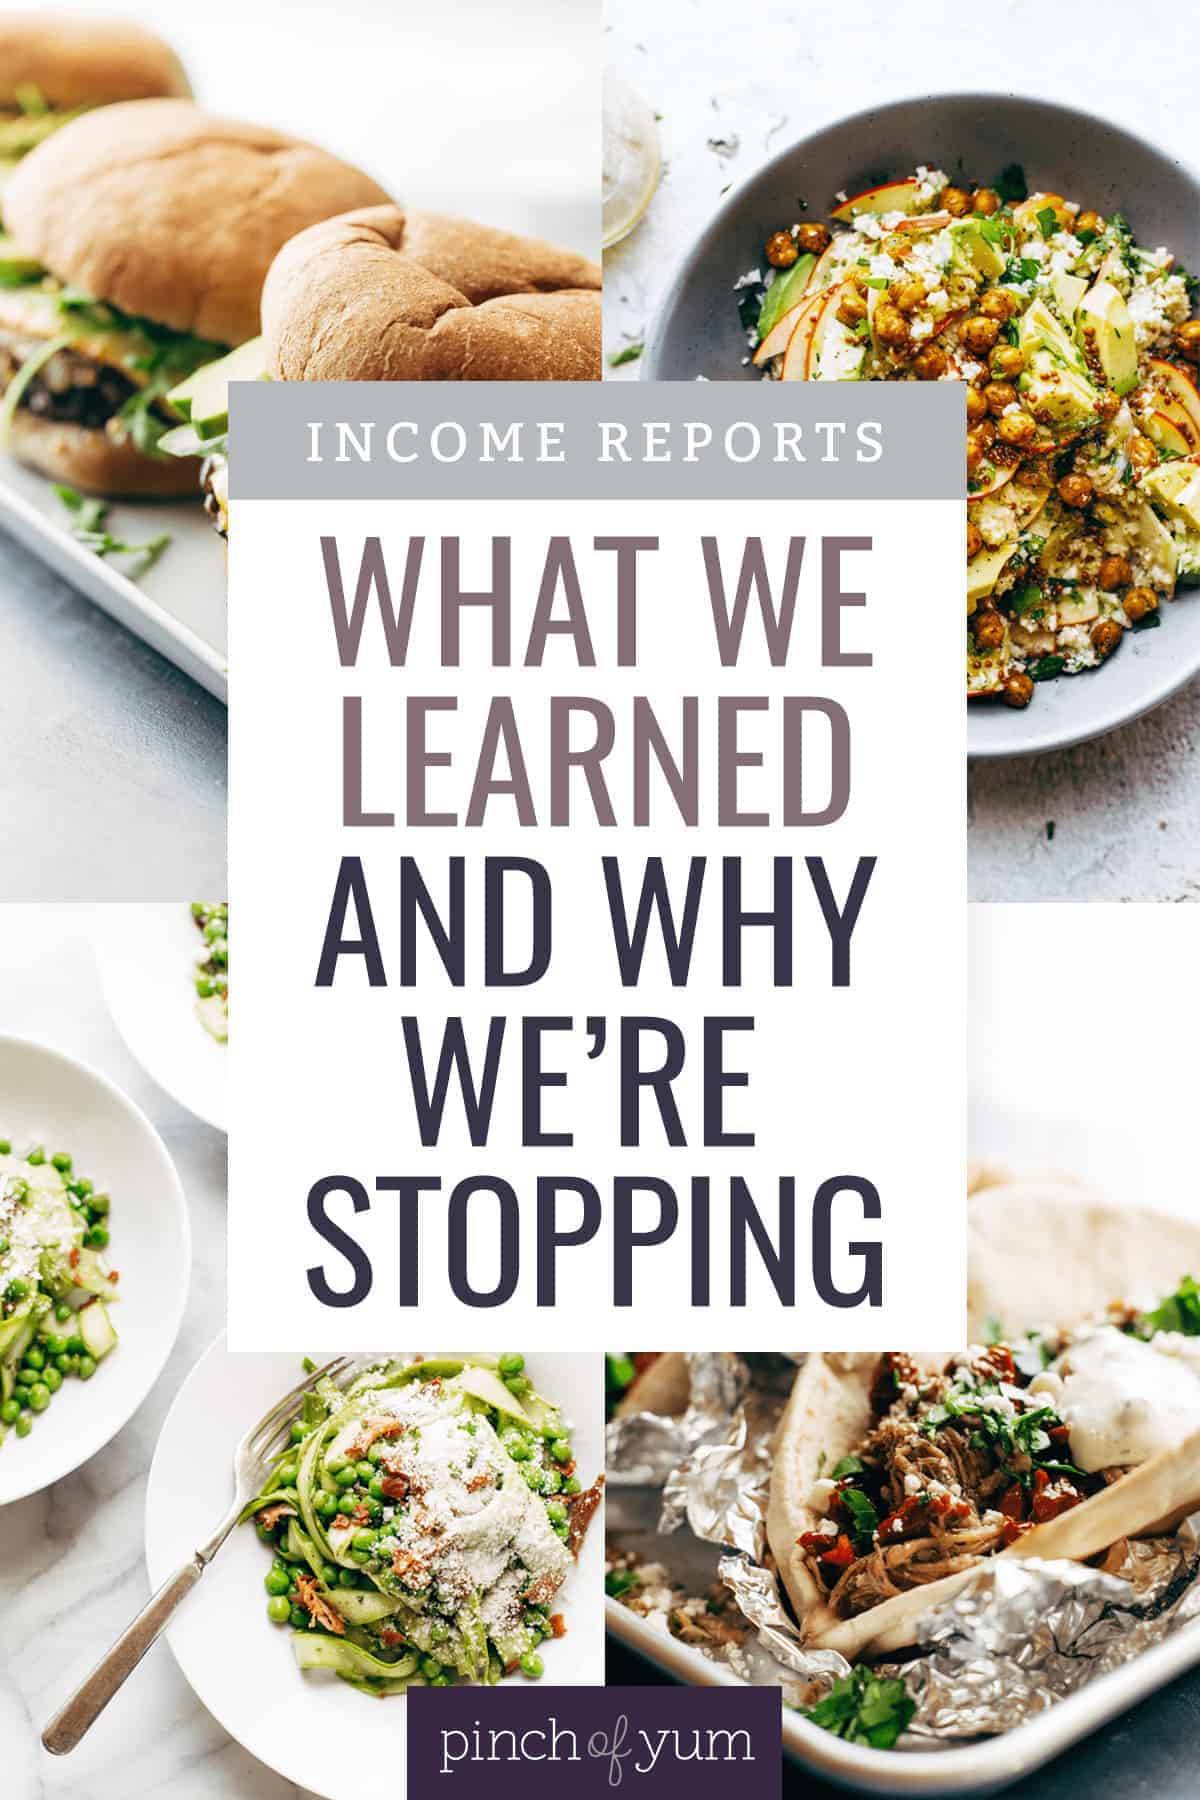 Income Reports What We Learned and Why We're Stopping